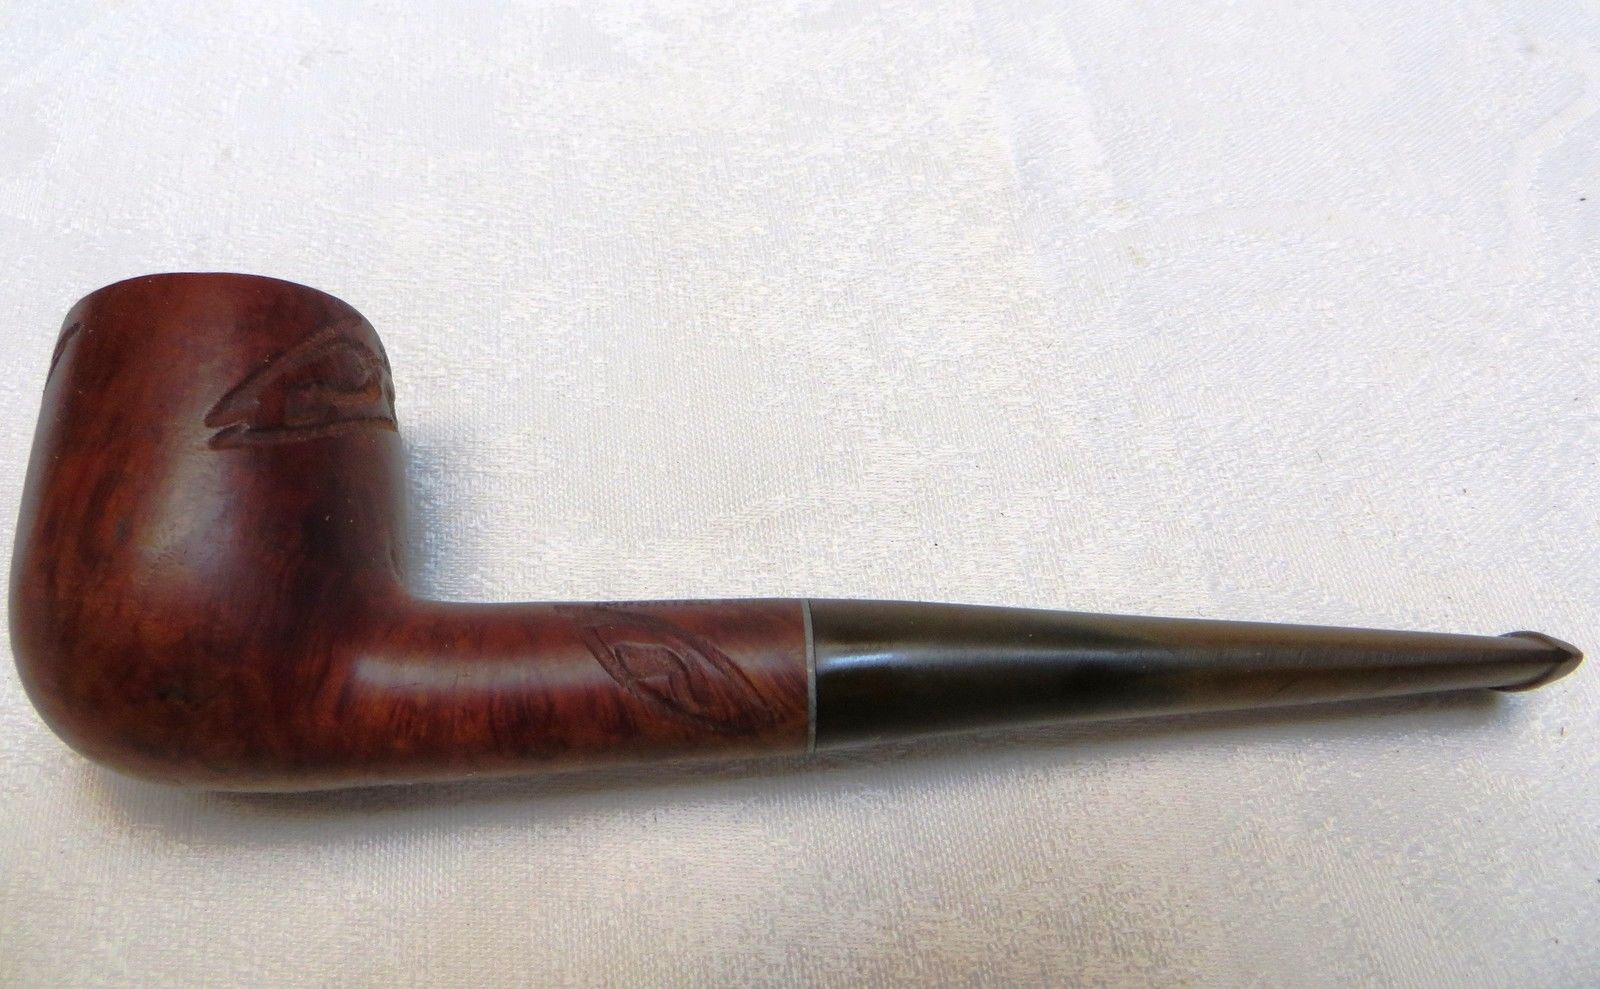 Almost Mint Brewster Pipe Imported Briar Wood Smoking Tobacco Pipe No ...